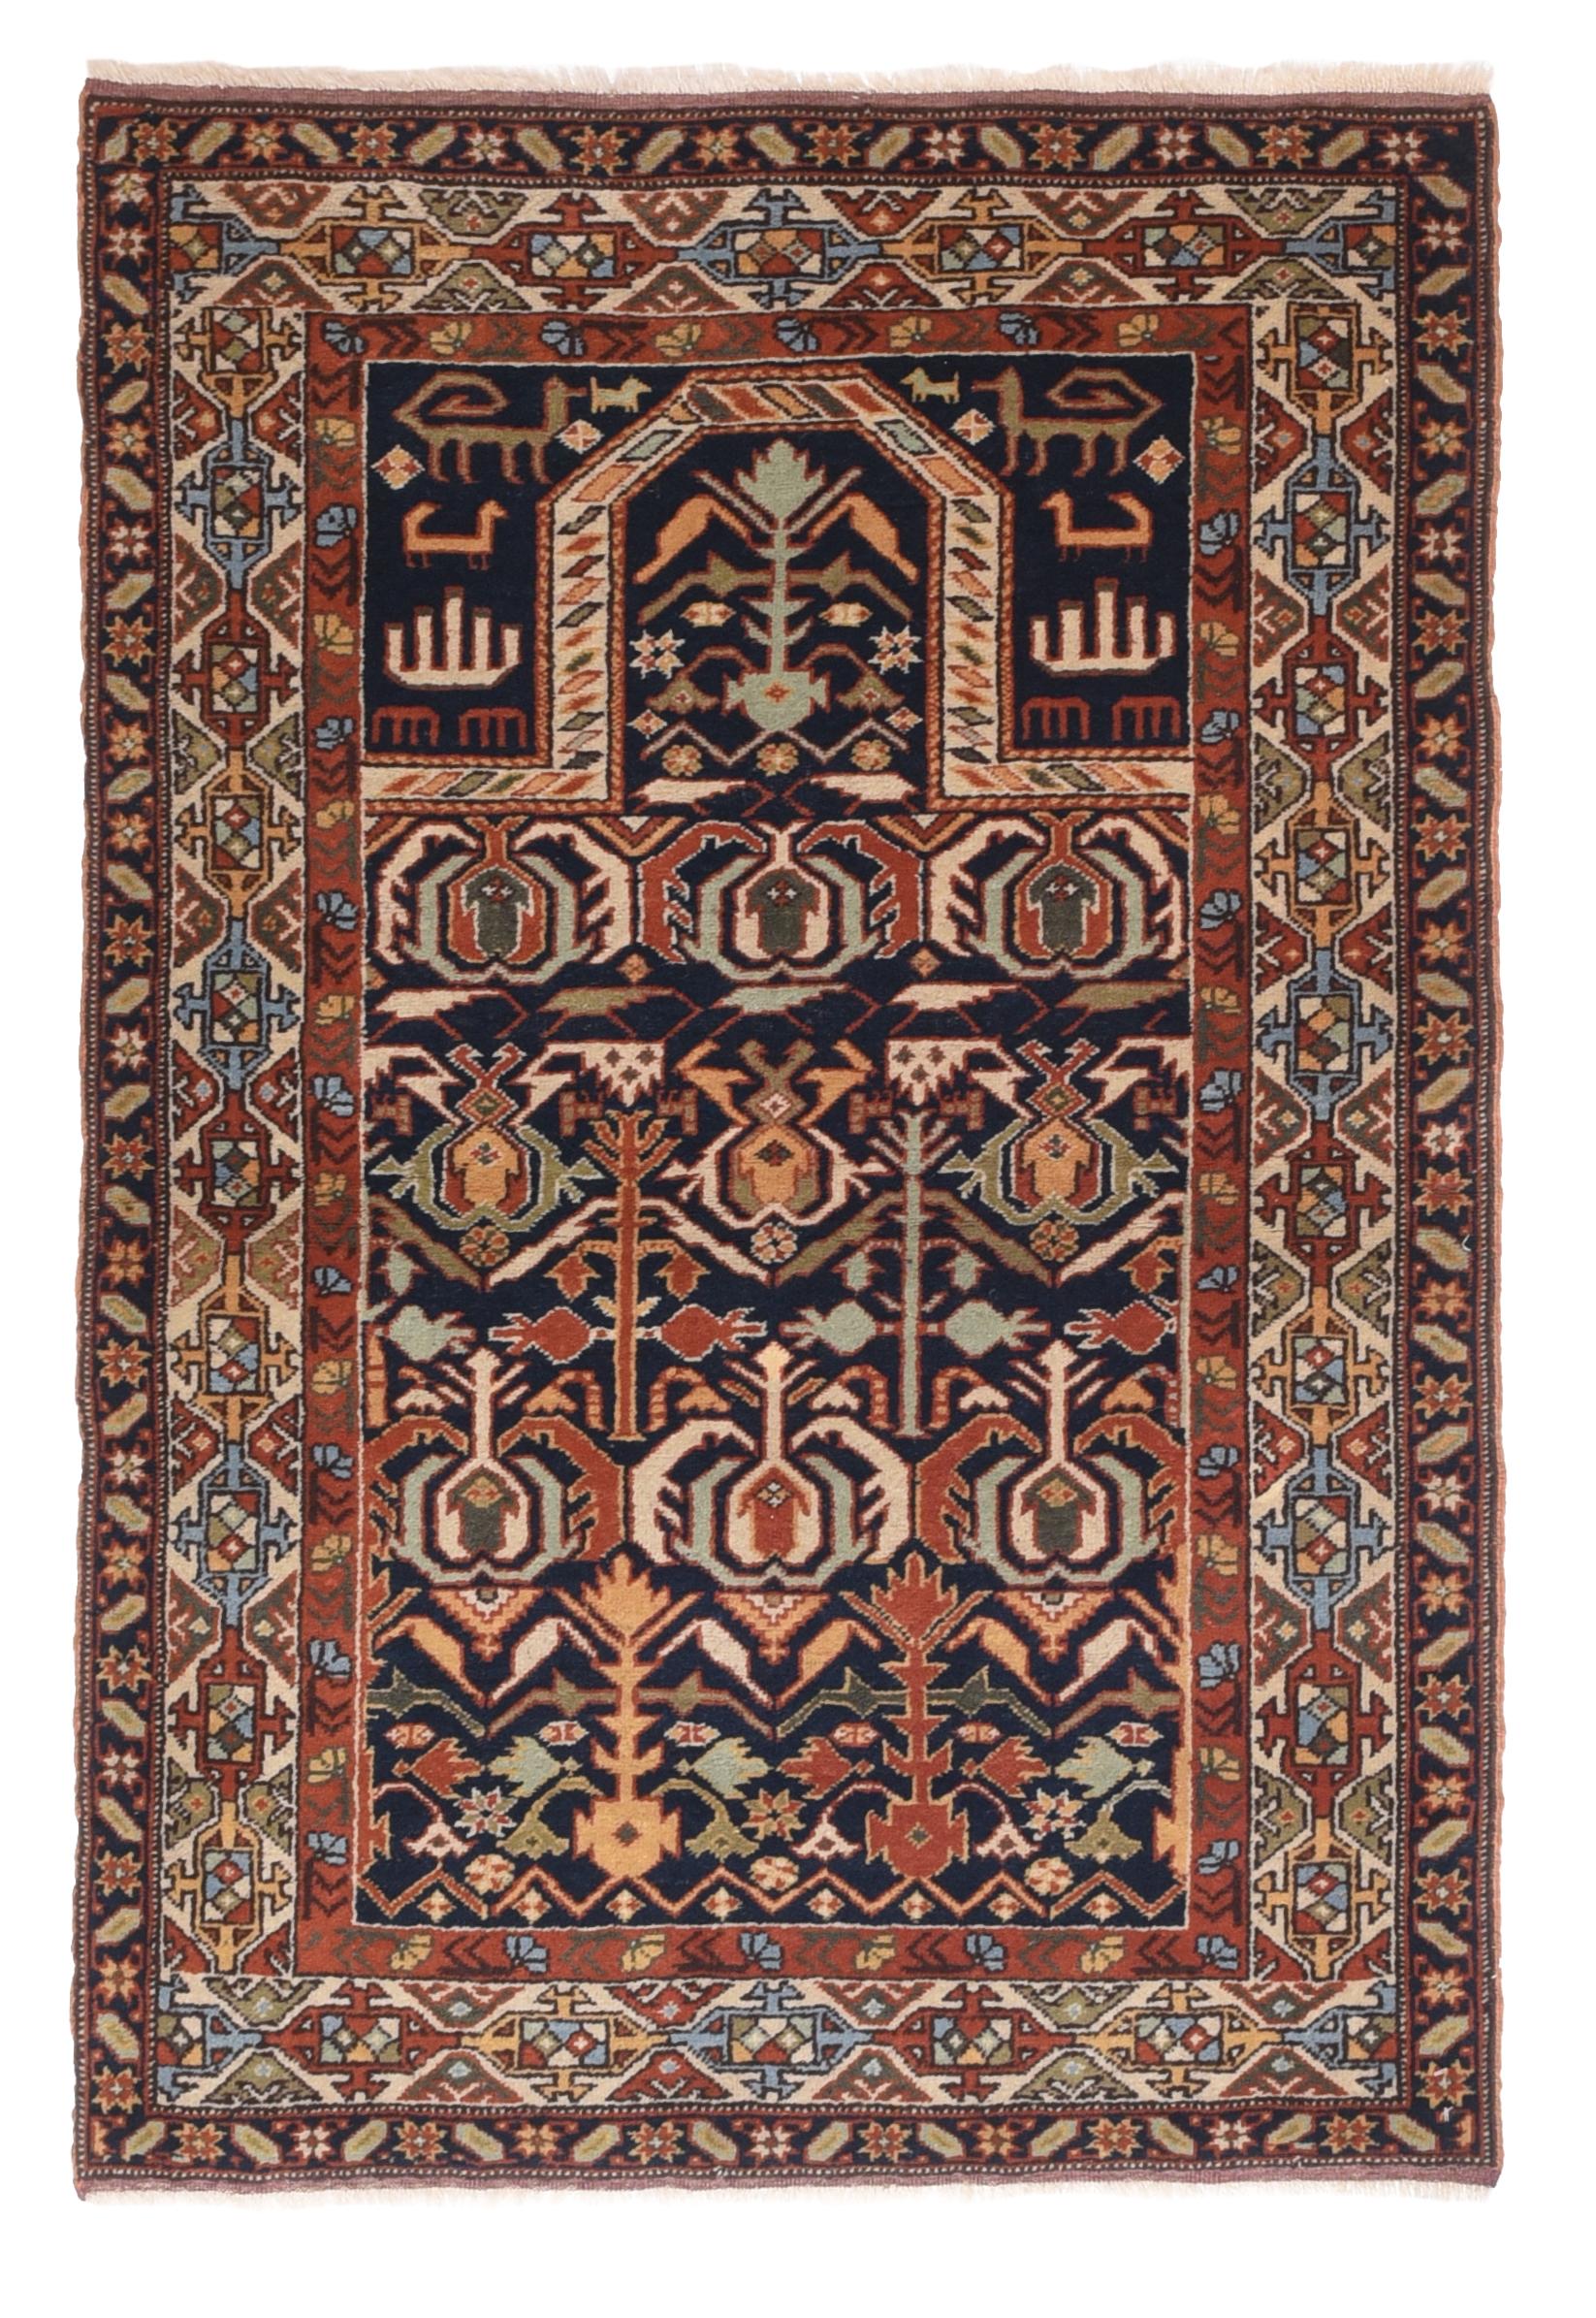 Antique Shirvan Daghestan Rug In Excellent Condition For Sale In New York, NY